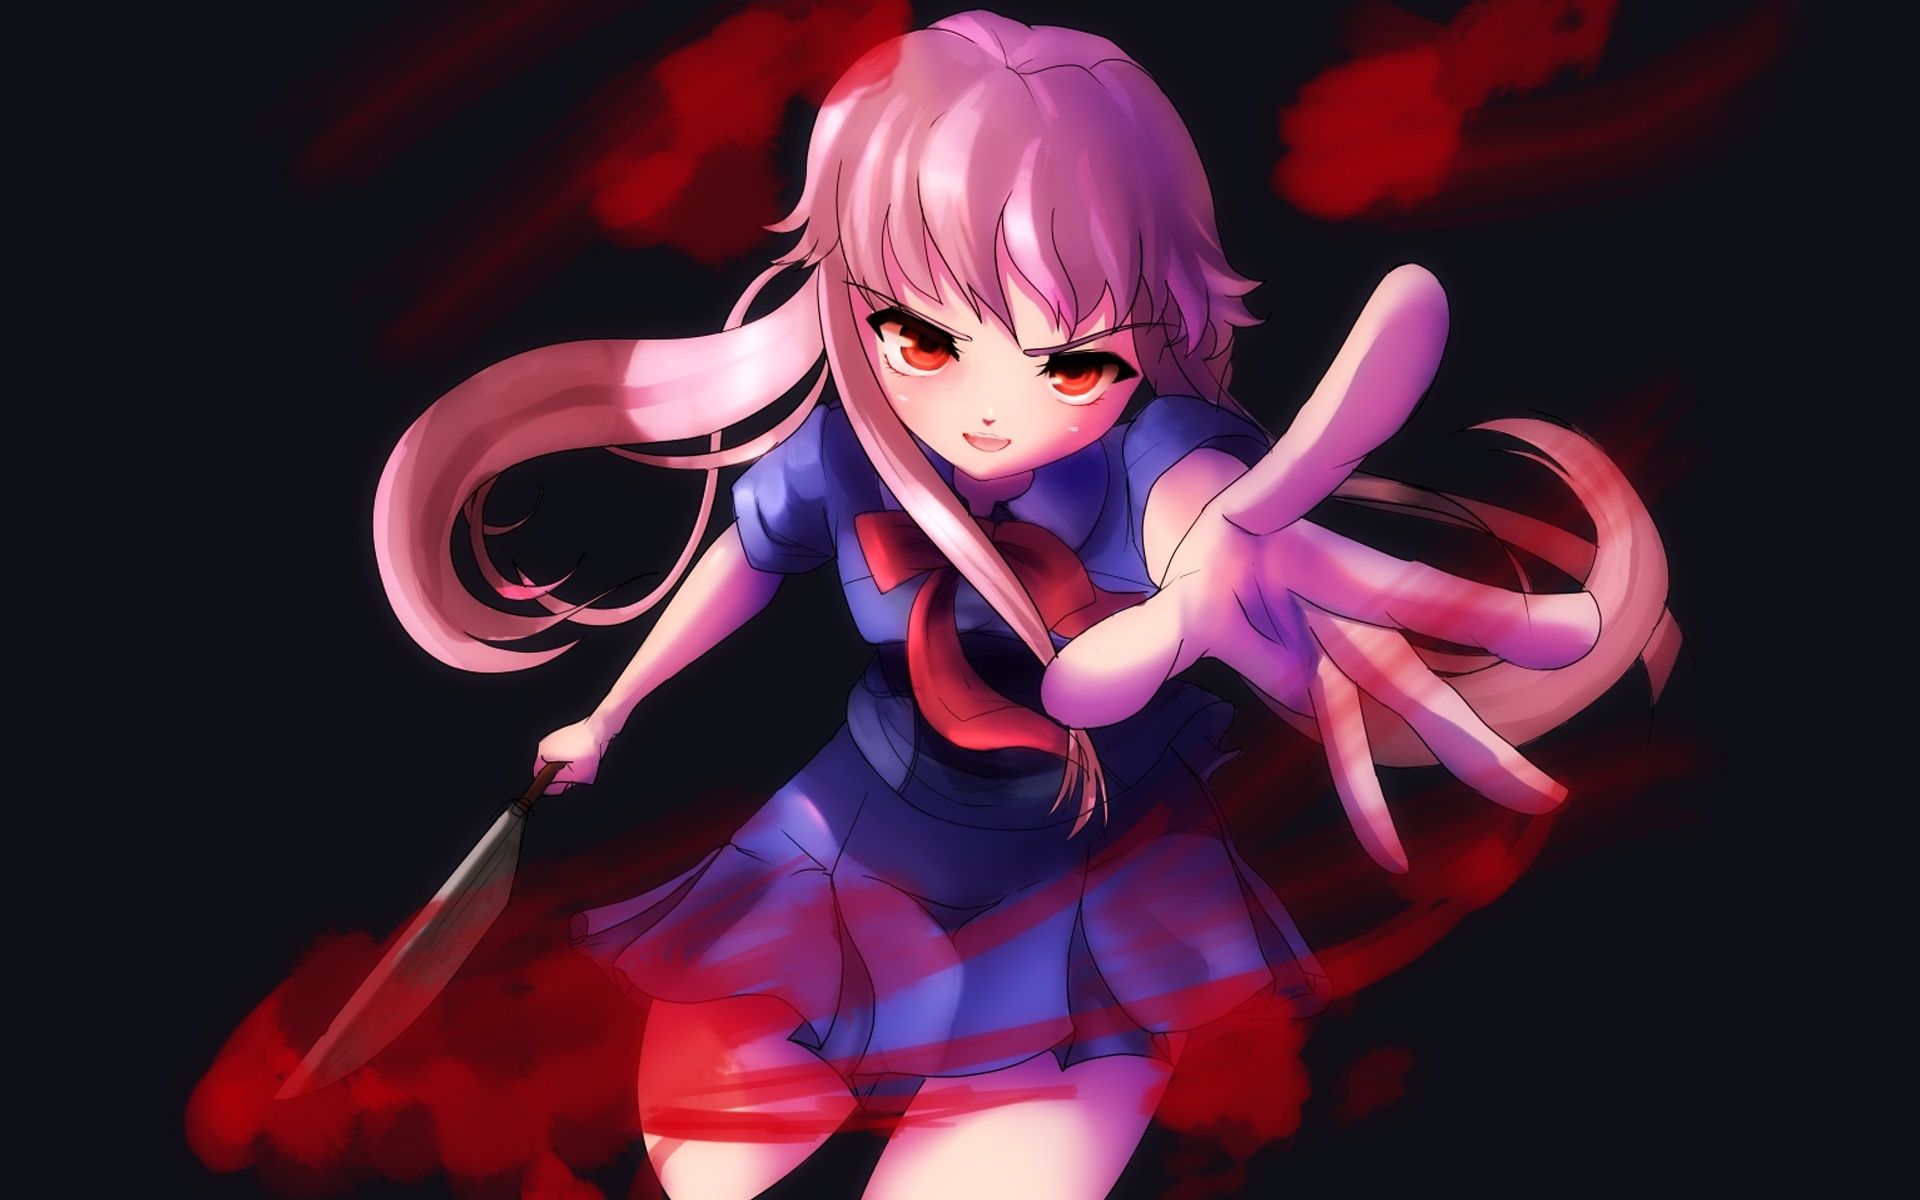 Wallpaper Crazy anime girl, knife, blood 1920x1200 HD Picture, Image